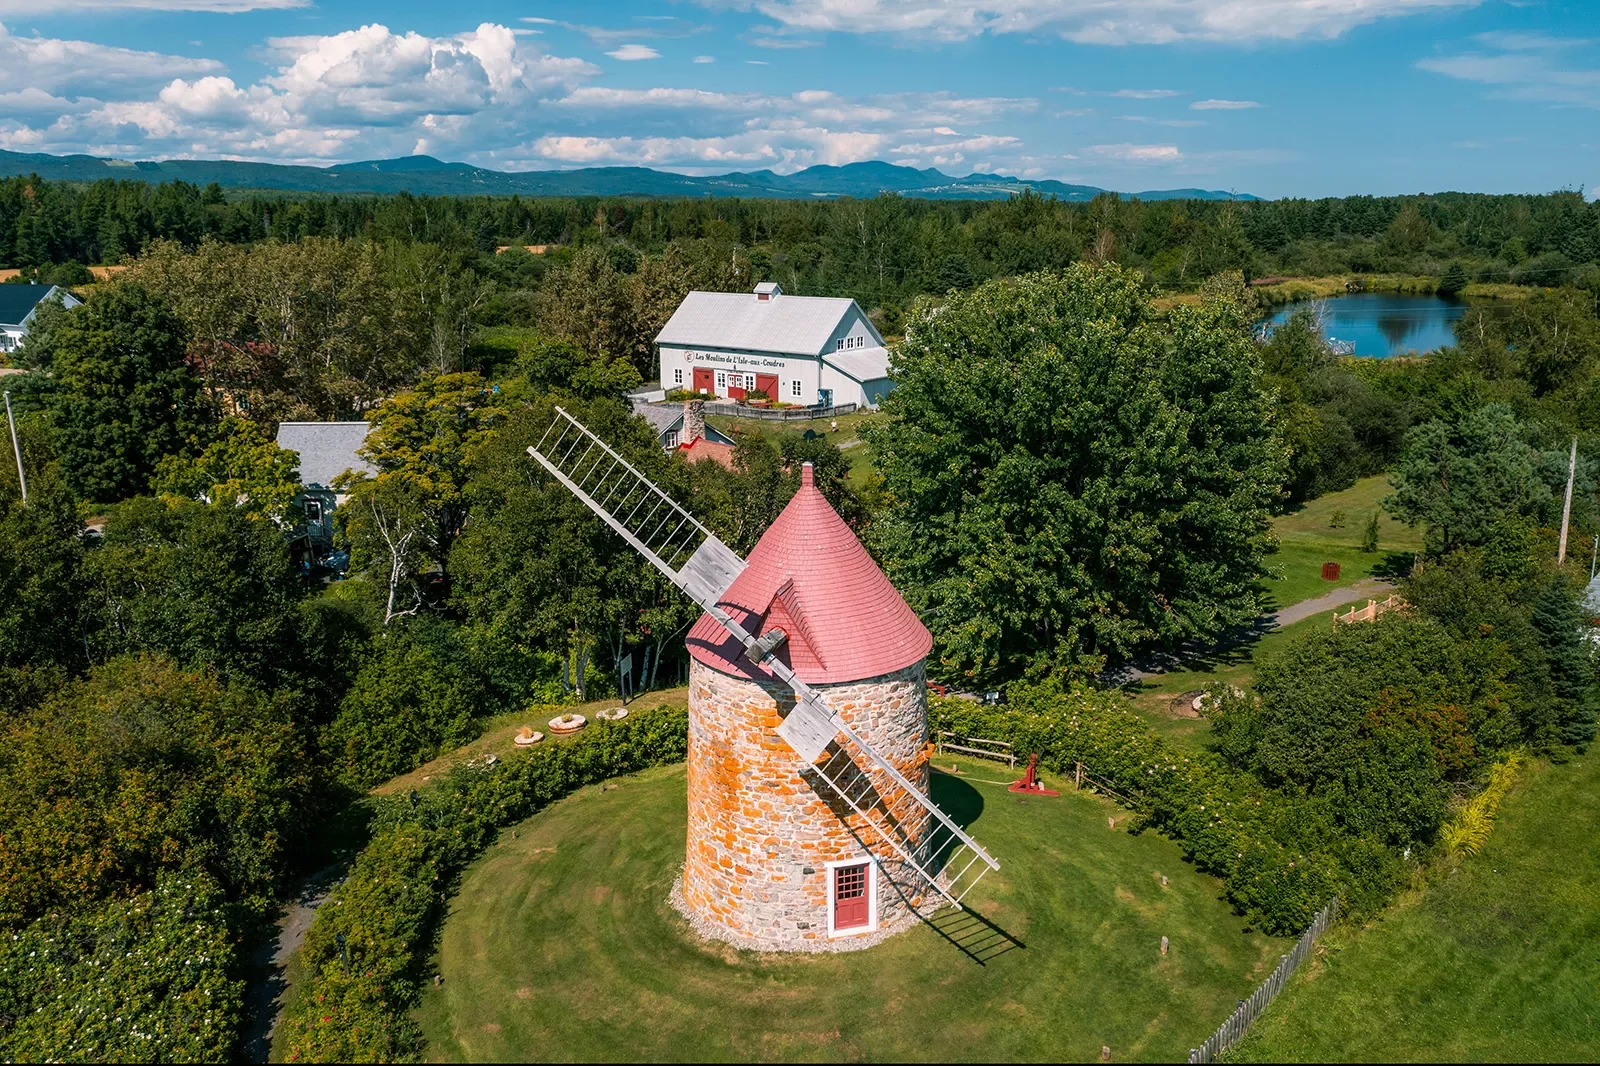 Wide shot of large windmill, white building in background.